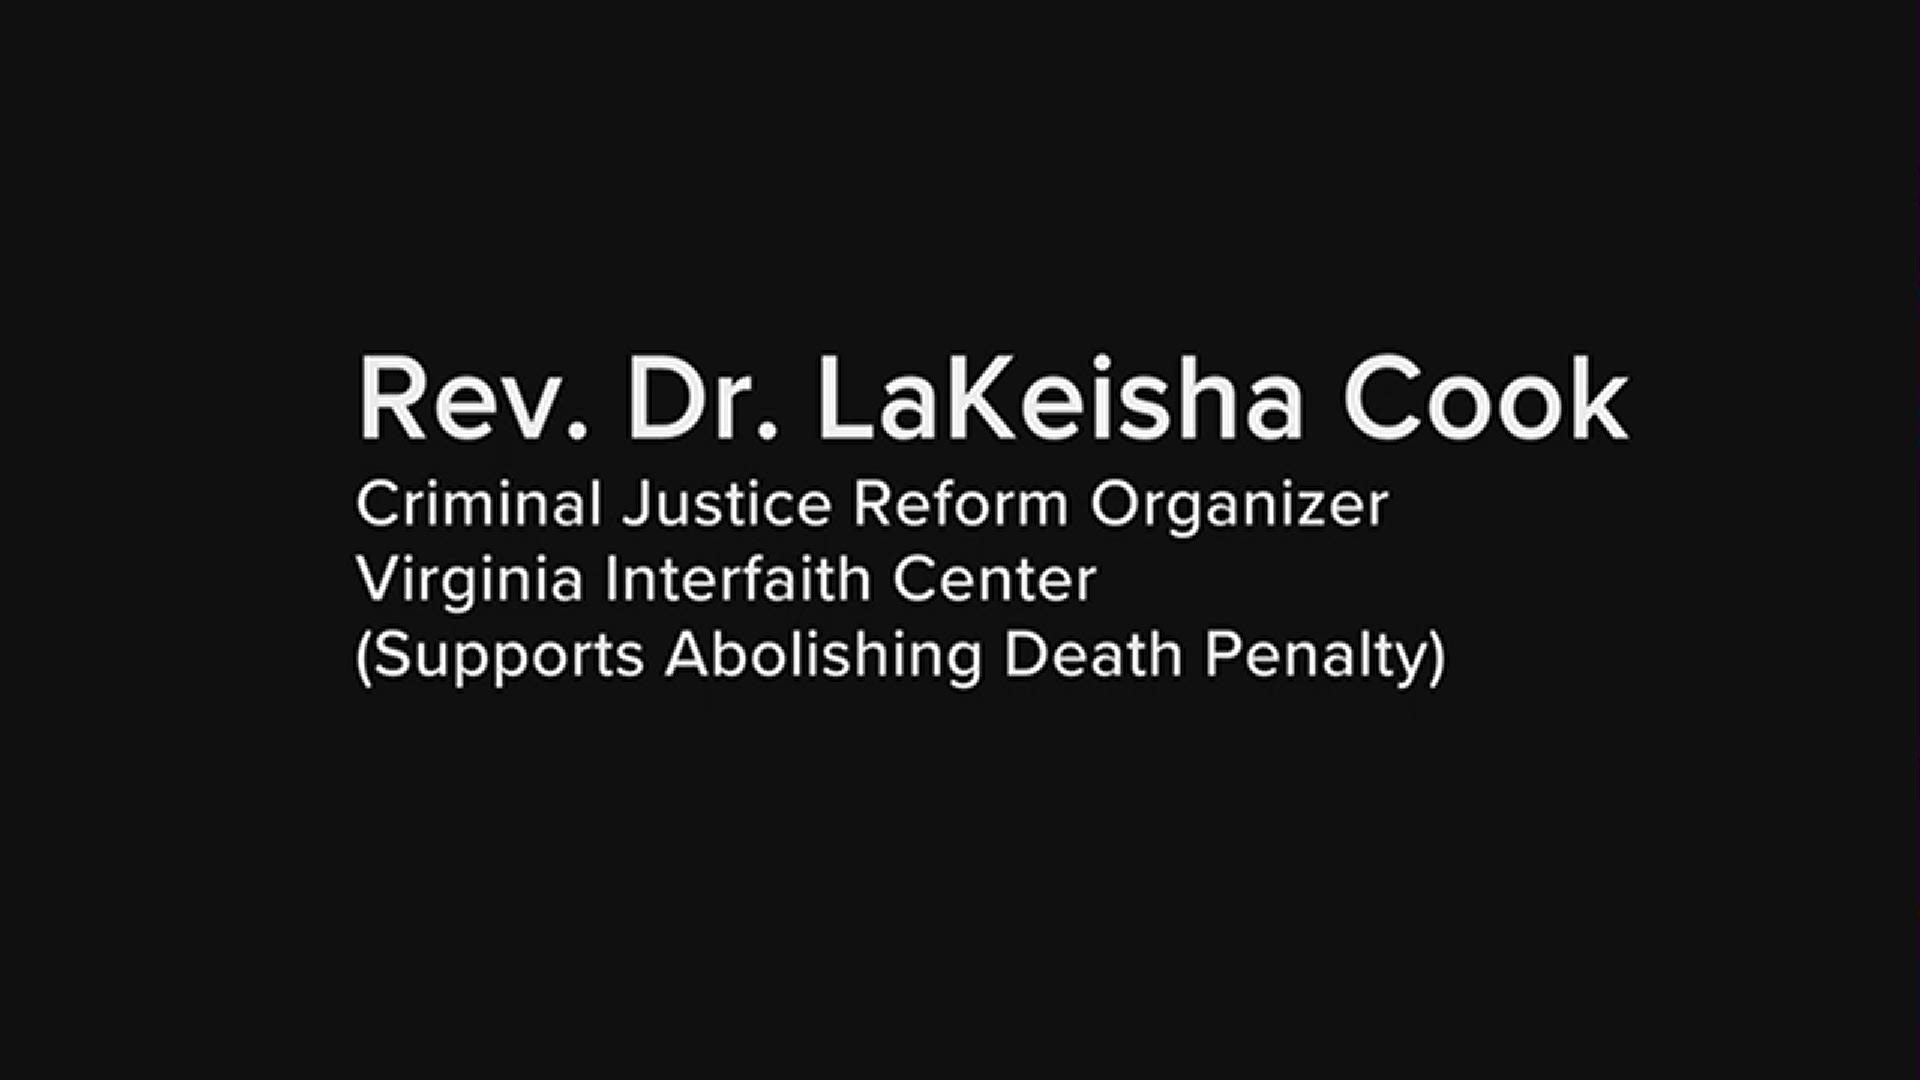 Rev. Dr. LaKeisha Cook, of the Virginia Interfaith Center, explains why she supports abolishing Virginia's death penalty.